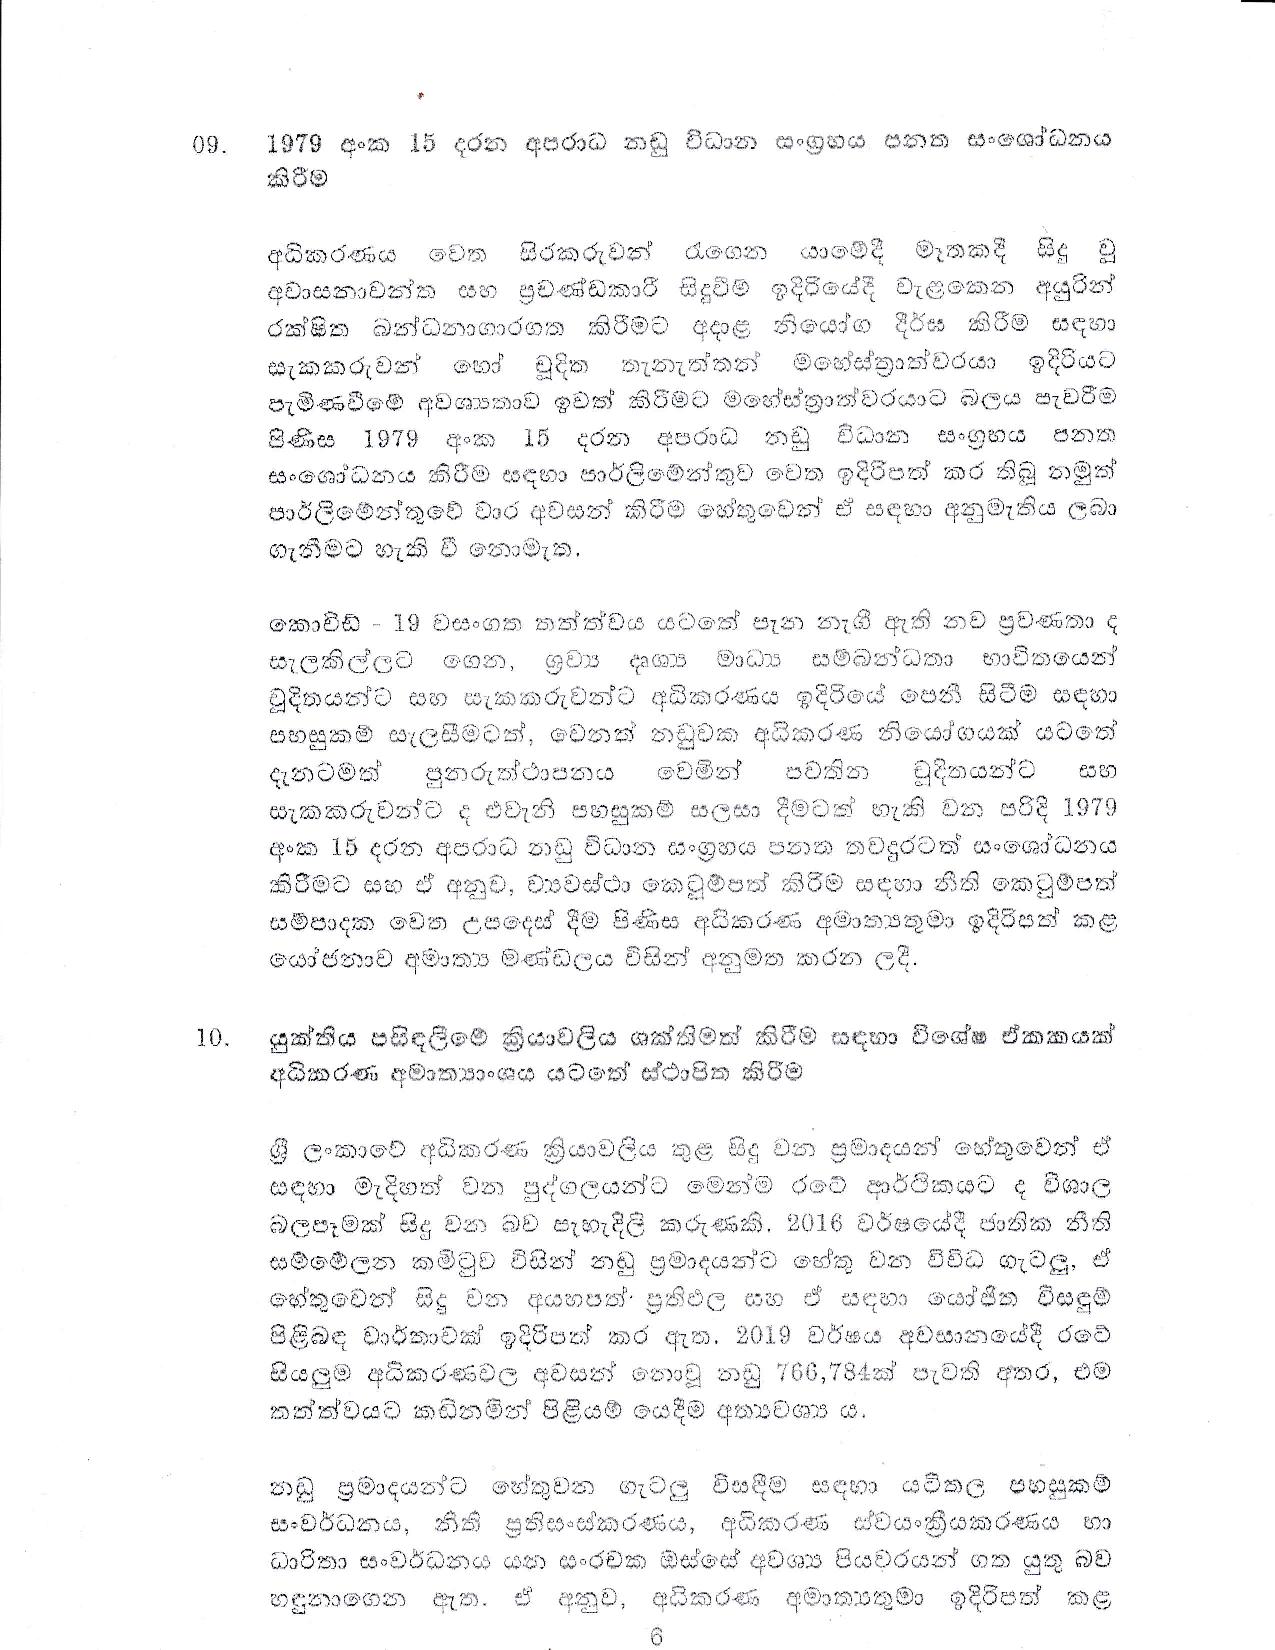 Cabinet Decision on 28.09.2020 page 006